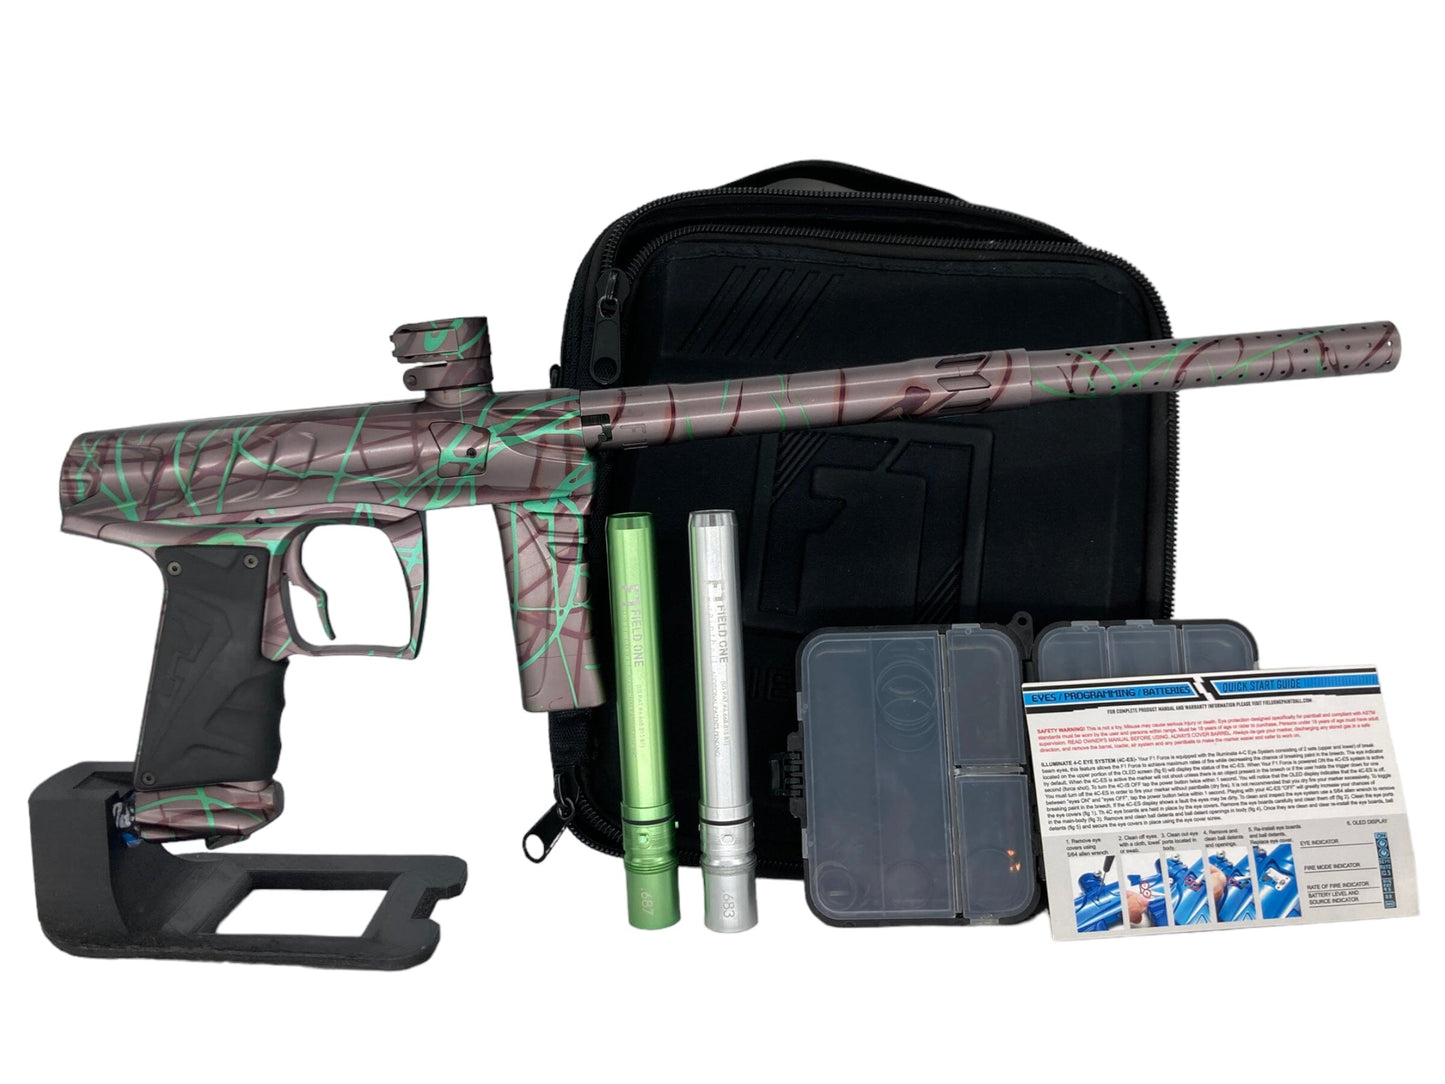 Used Field One Force Paintball Gun Upgraded Paintball Gun from CPXBrosPaintball Buy/Sell/Trade Paintball Markers, New Paintball Guns, Paintball Hoppers, Paintball Masks, and Hormesis Headbands